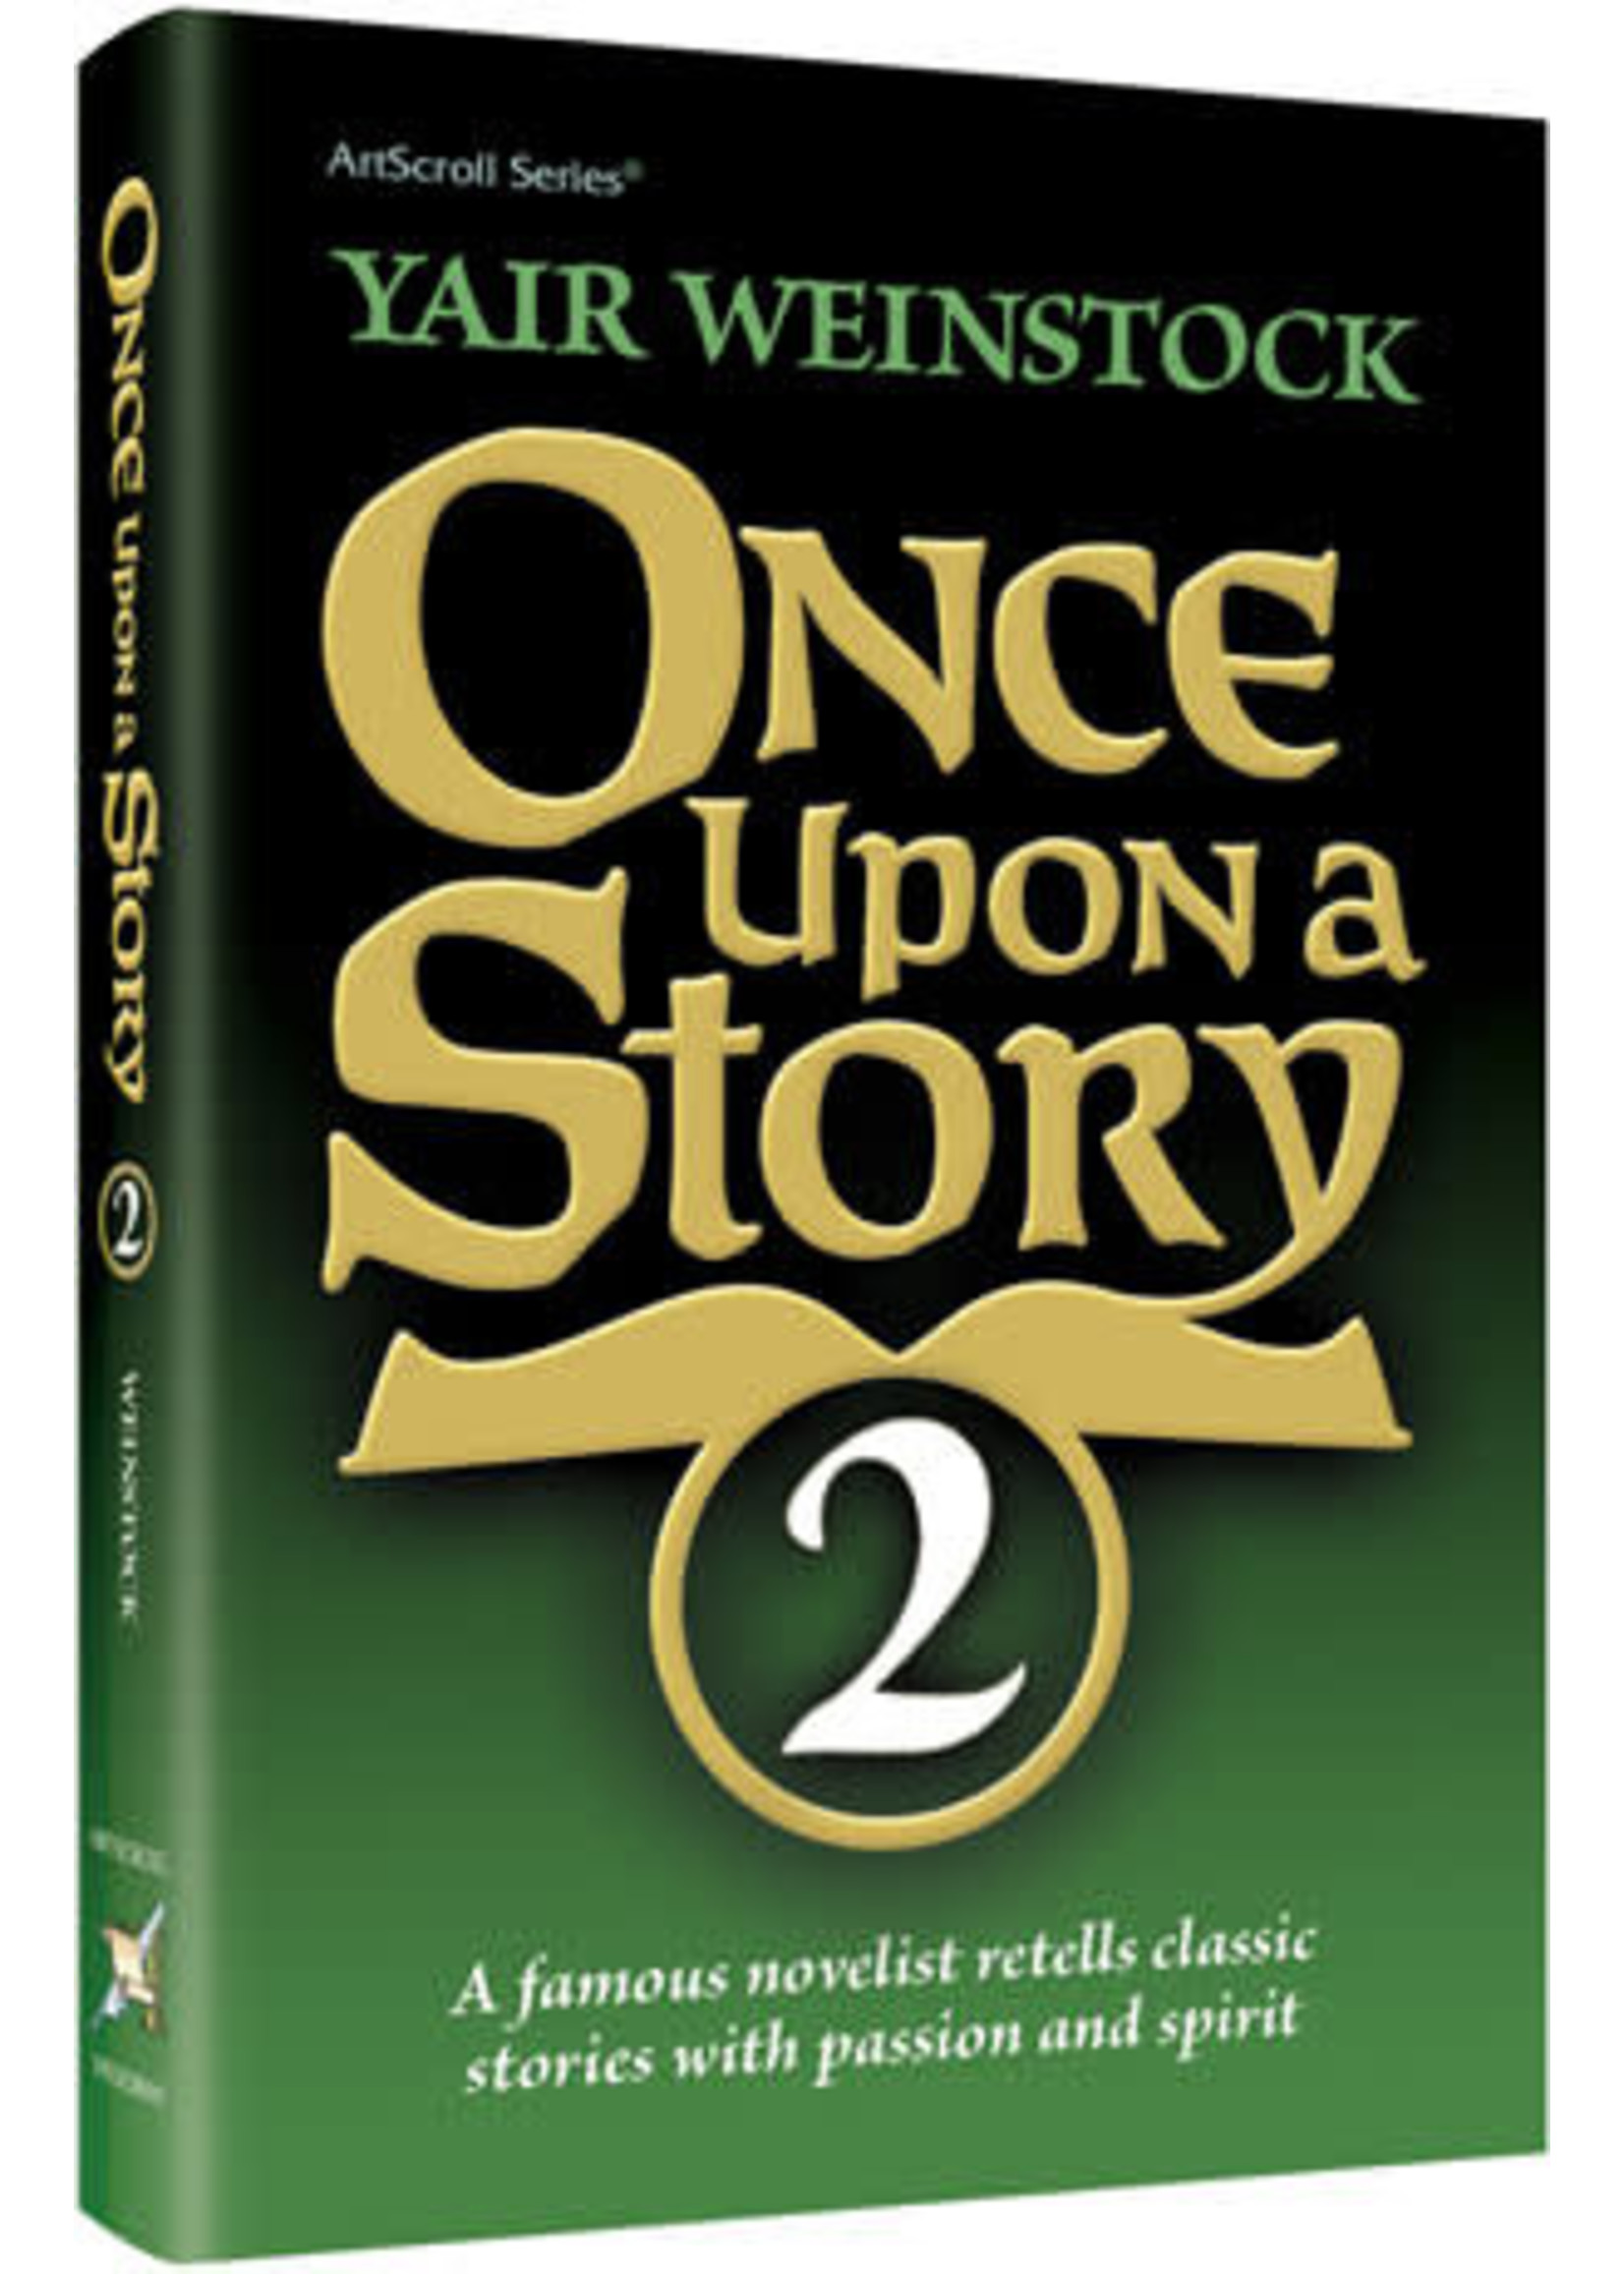 ONCE UPON A STORY 2 H/C